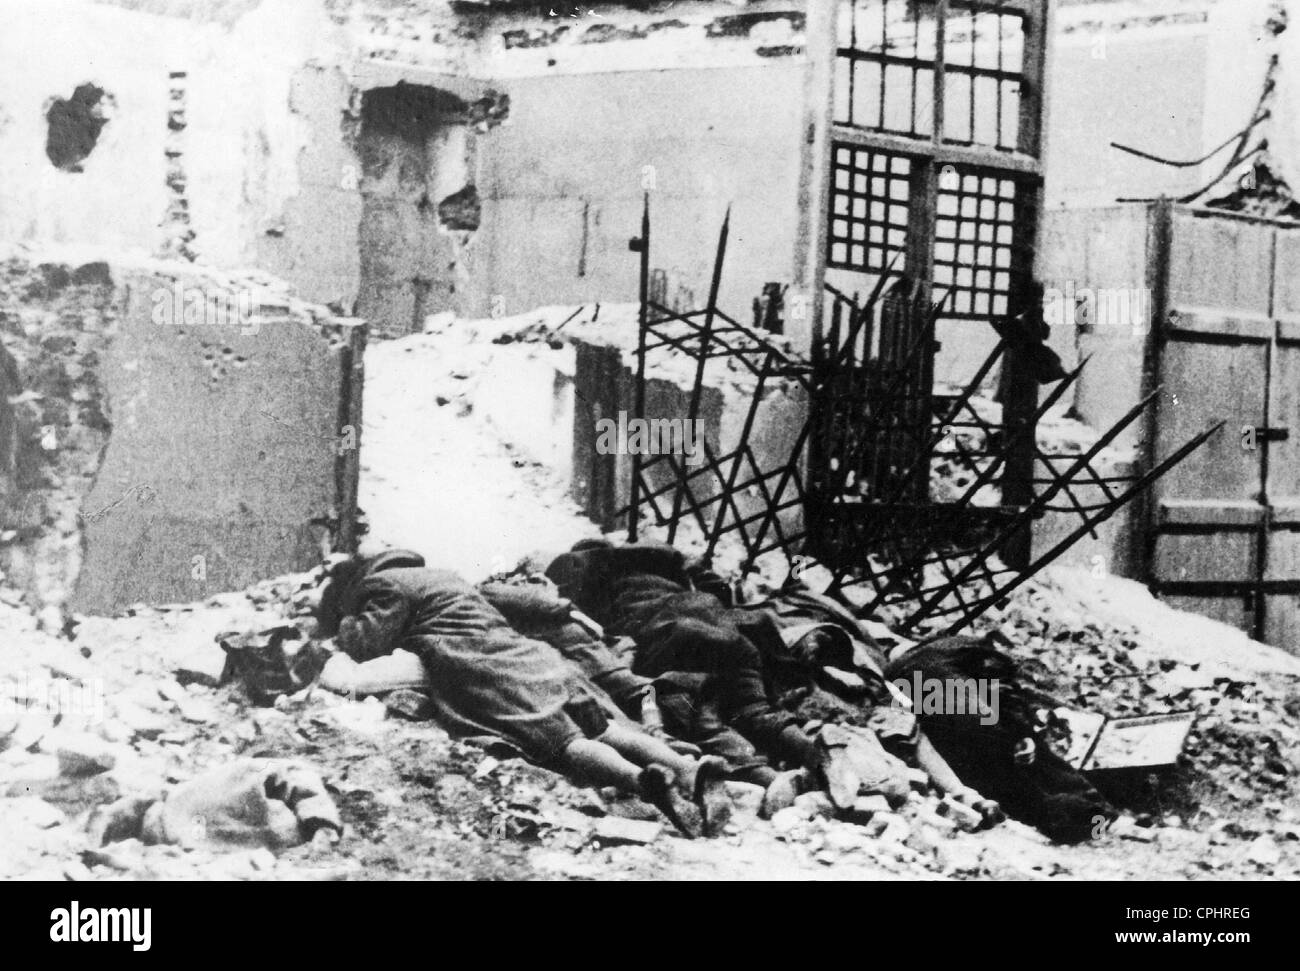 Dead bodies during the Warsaw Ghetto Uprising, 1943 (b/w photo) Stock Photo